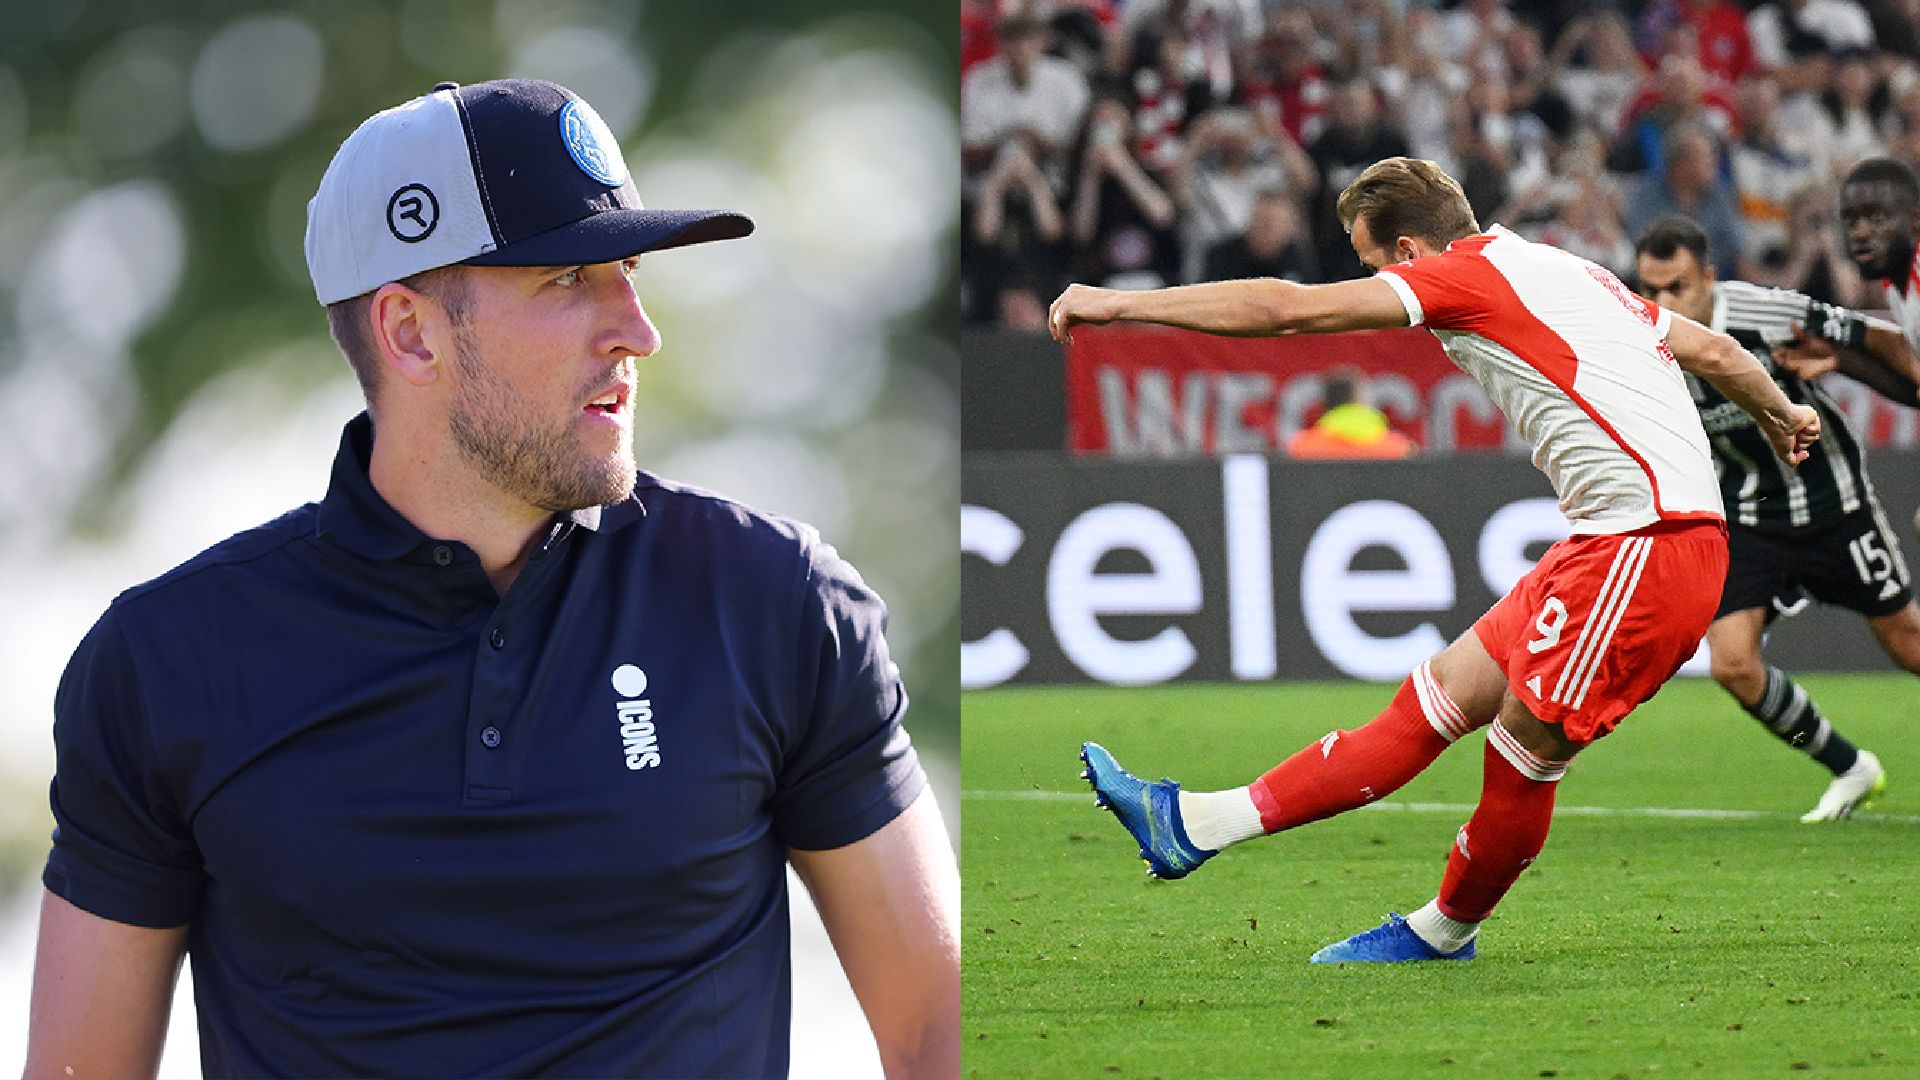 Harry Kane on what separates pro golfers from the rest of us